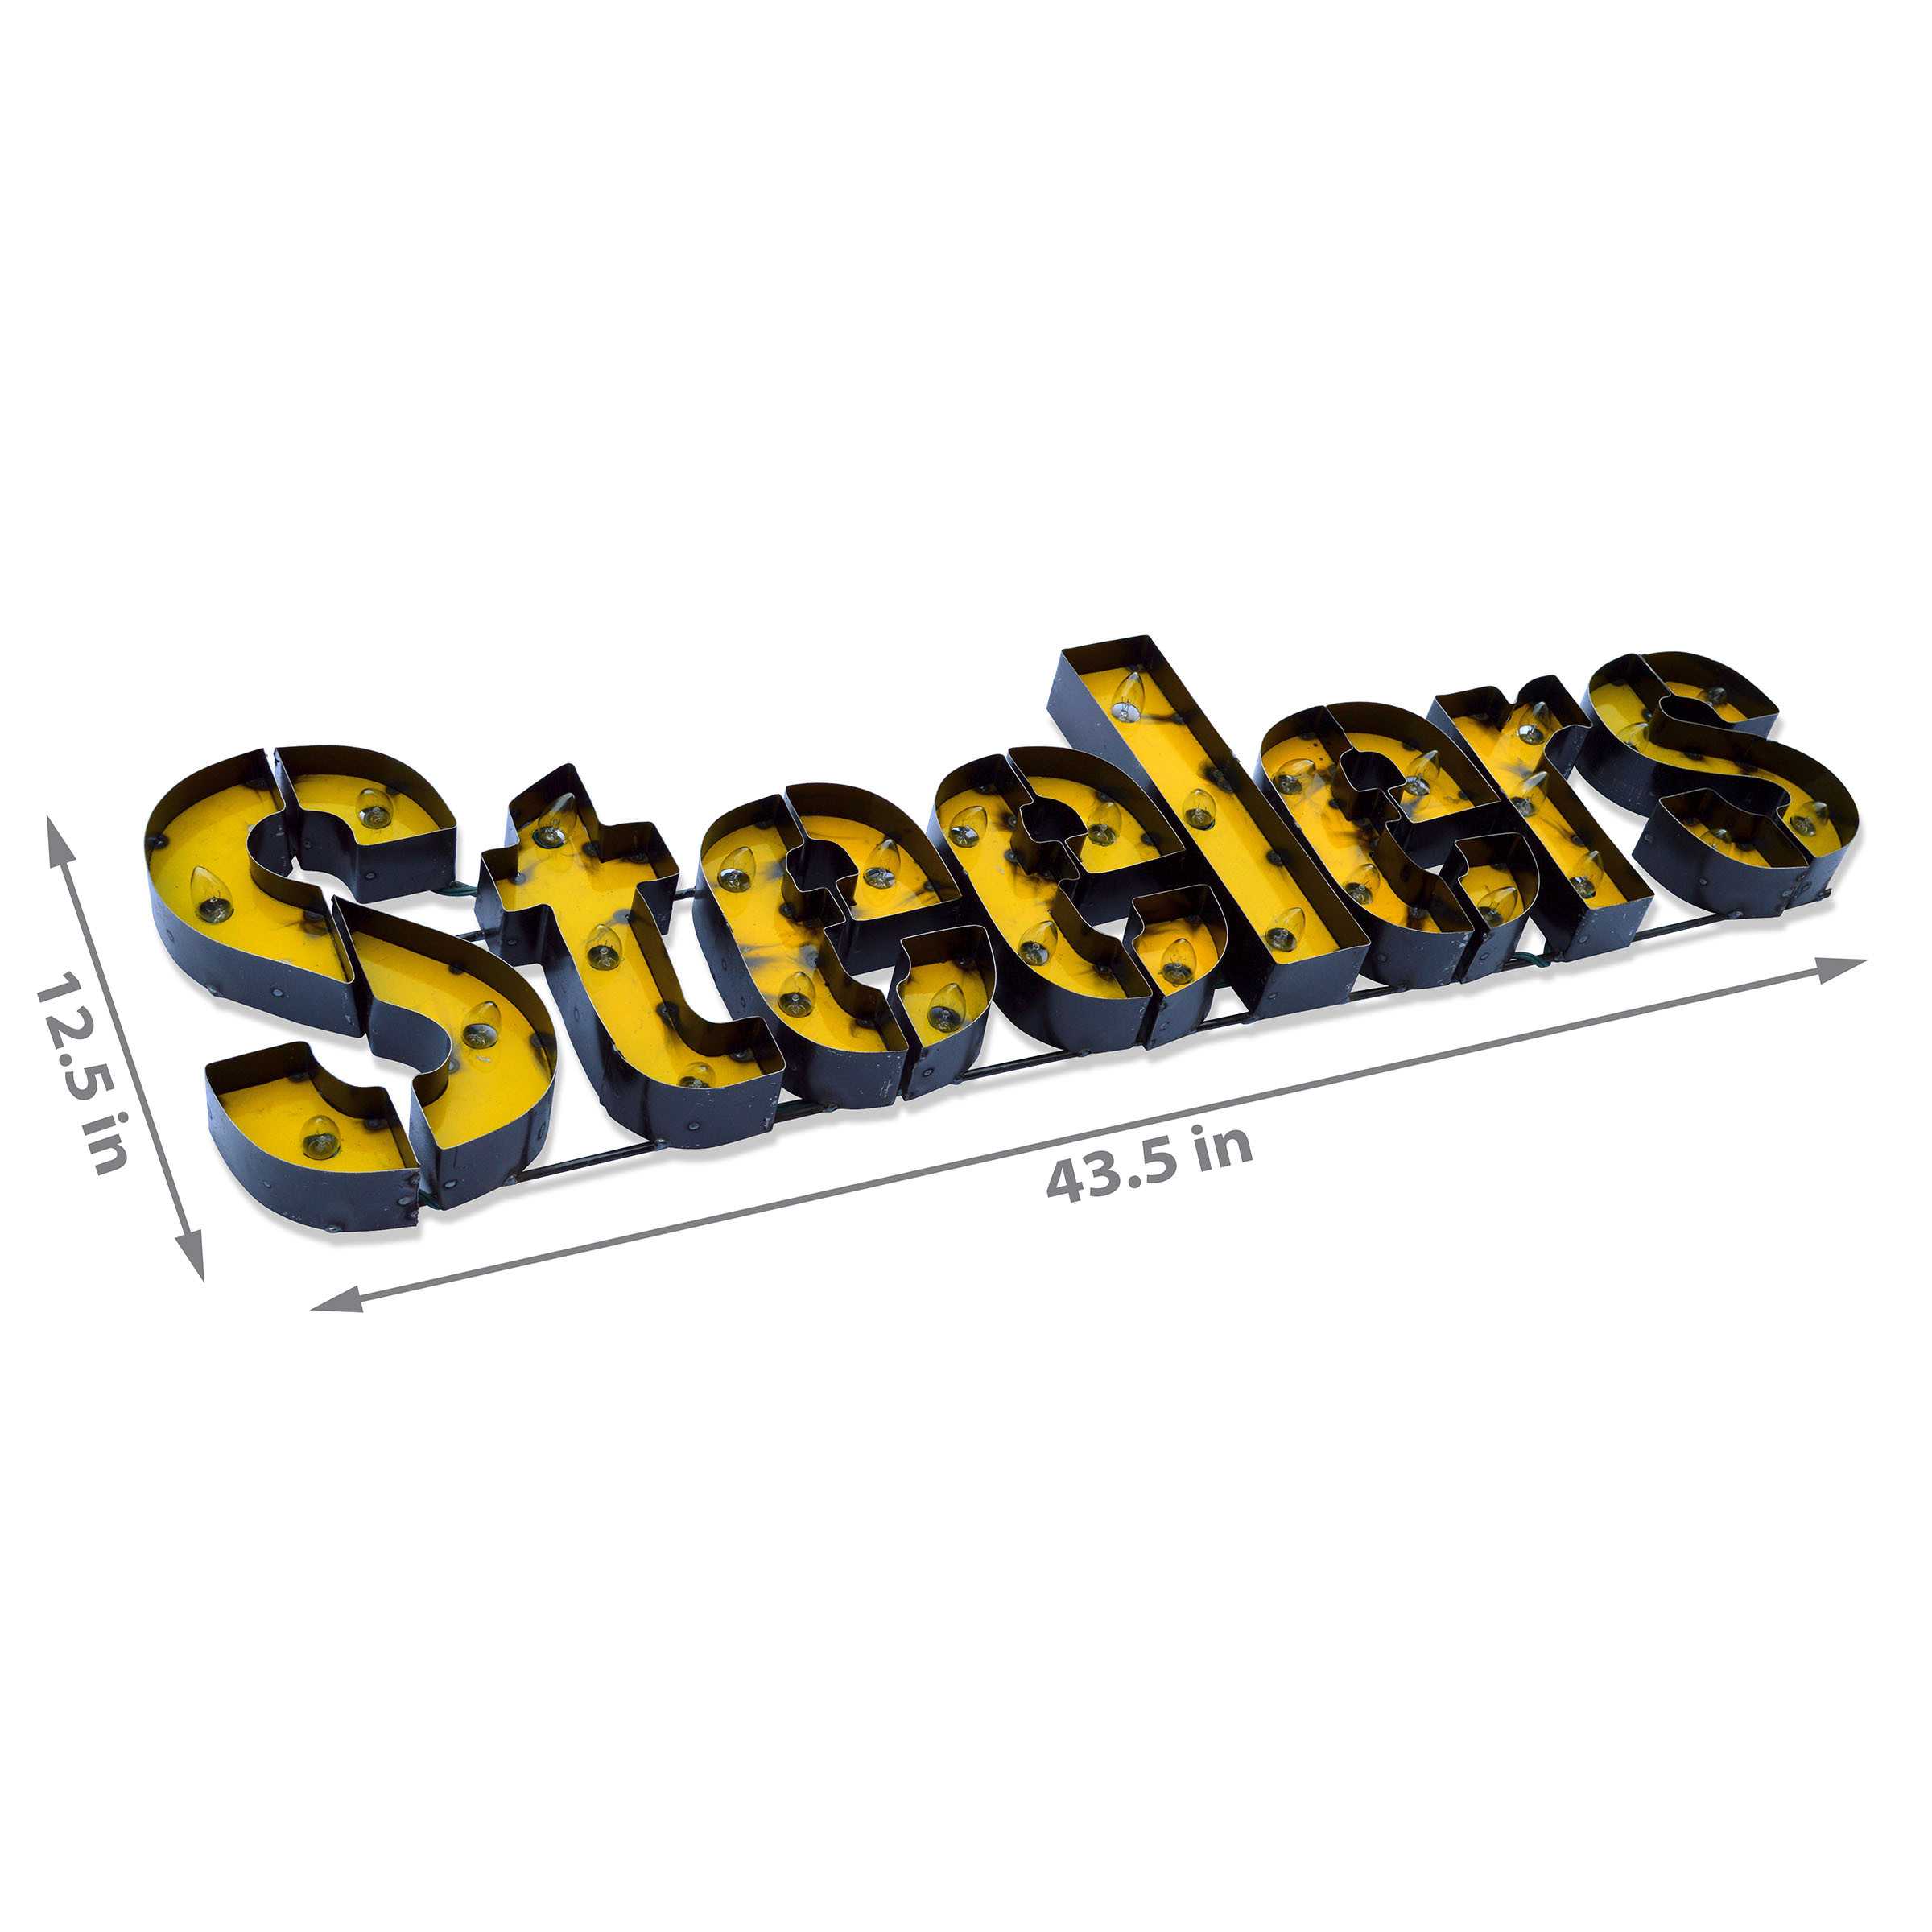 Pittsburgh Steelers Lighted Recycled Metal Sign